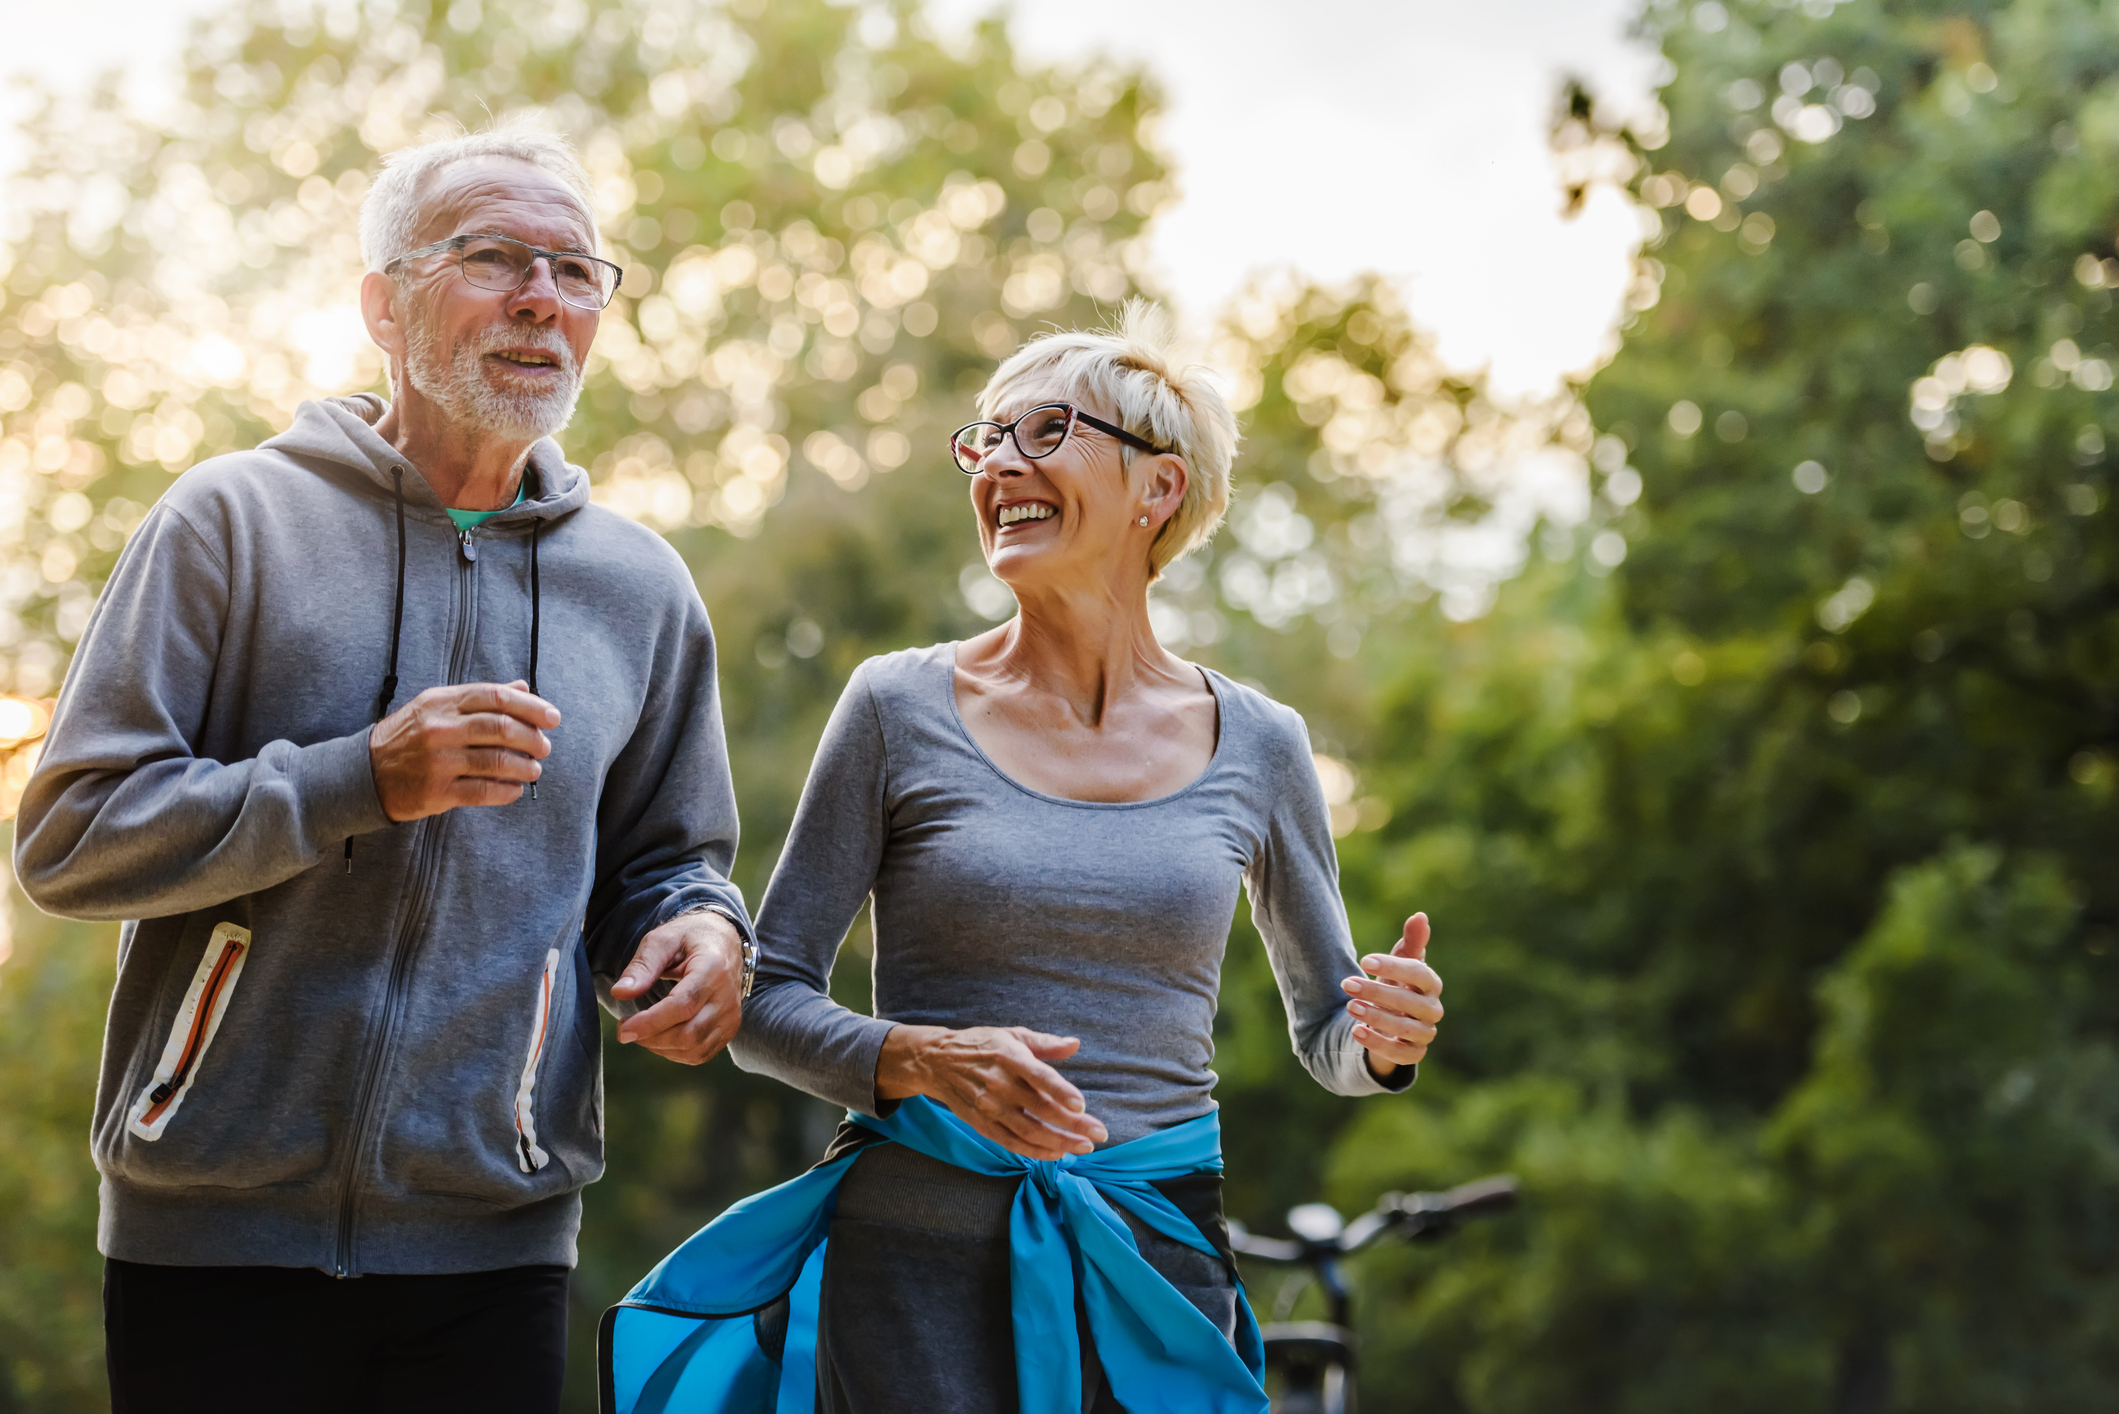 Smiling senior couple jogging in the park (iStock: Lordn)